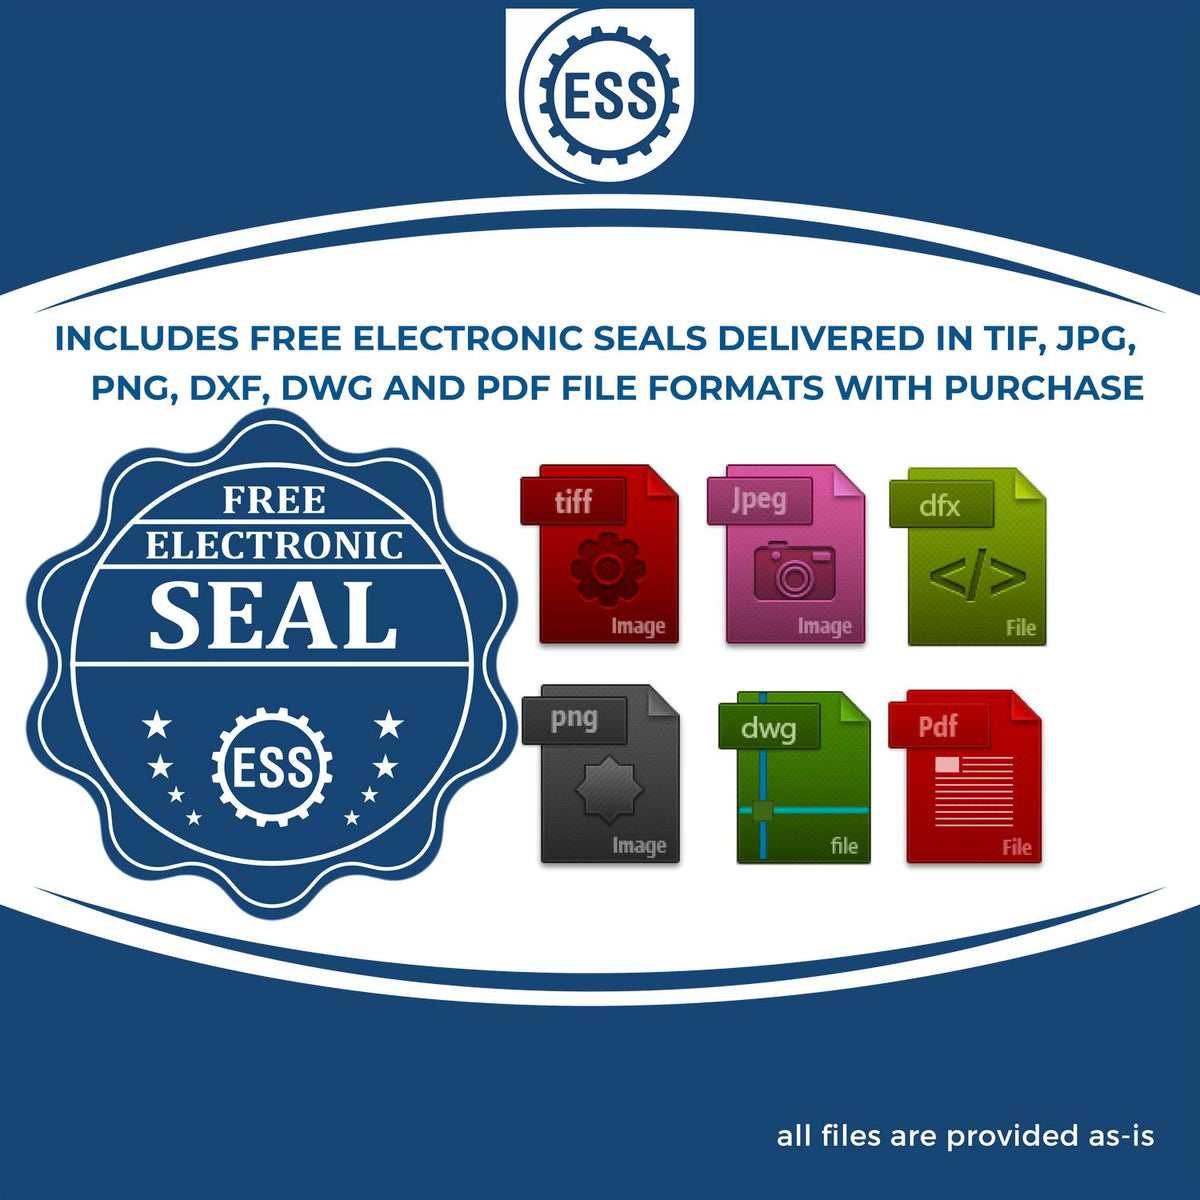 An infographic for the free electronic seal for the Premium MaxLight Pre-Inked Louisiana Landscape Architectural Stamp illustrating the different file type icons such as DXF, DWG, TIF, JPG and PNG.